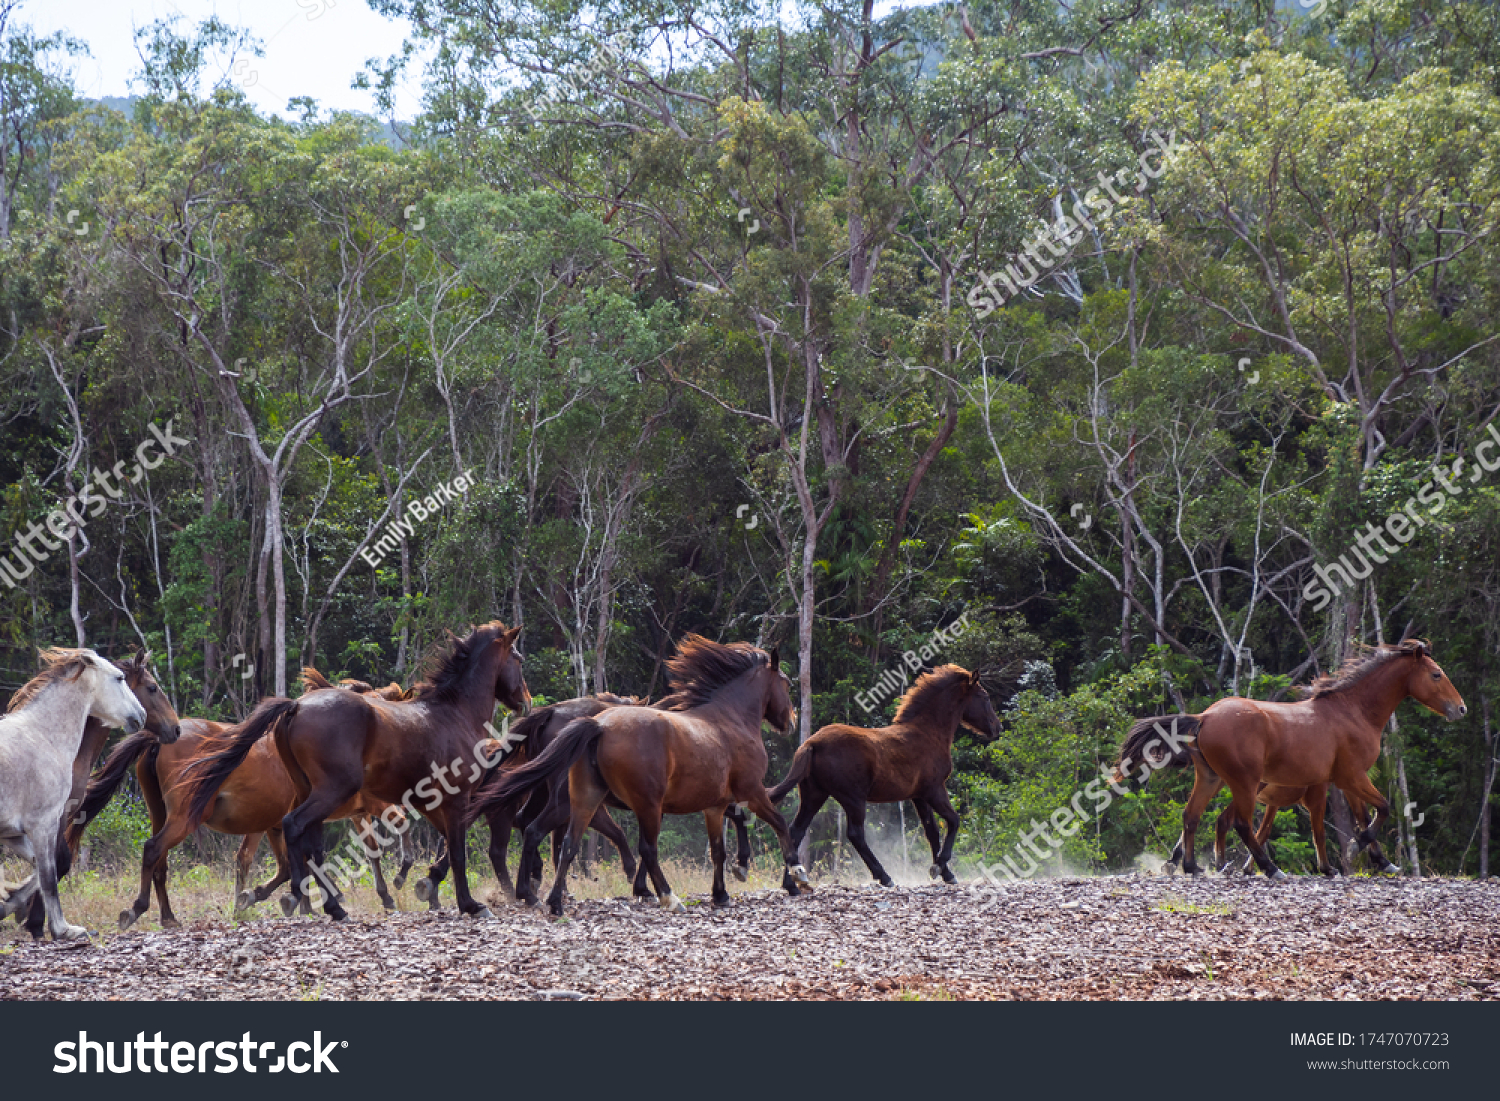 Mob or Band of wild Brumbies run across burnt and logged Australian bushland, kicking dust  #1747070723